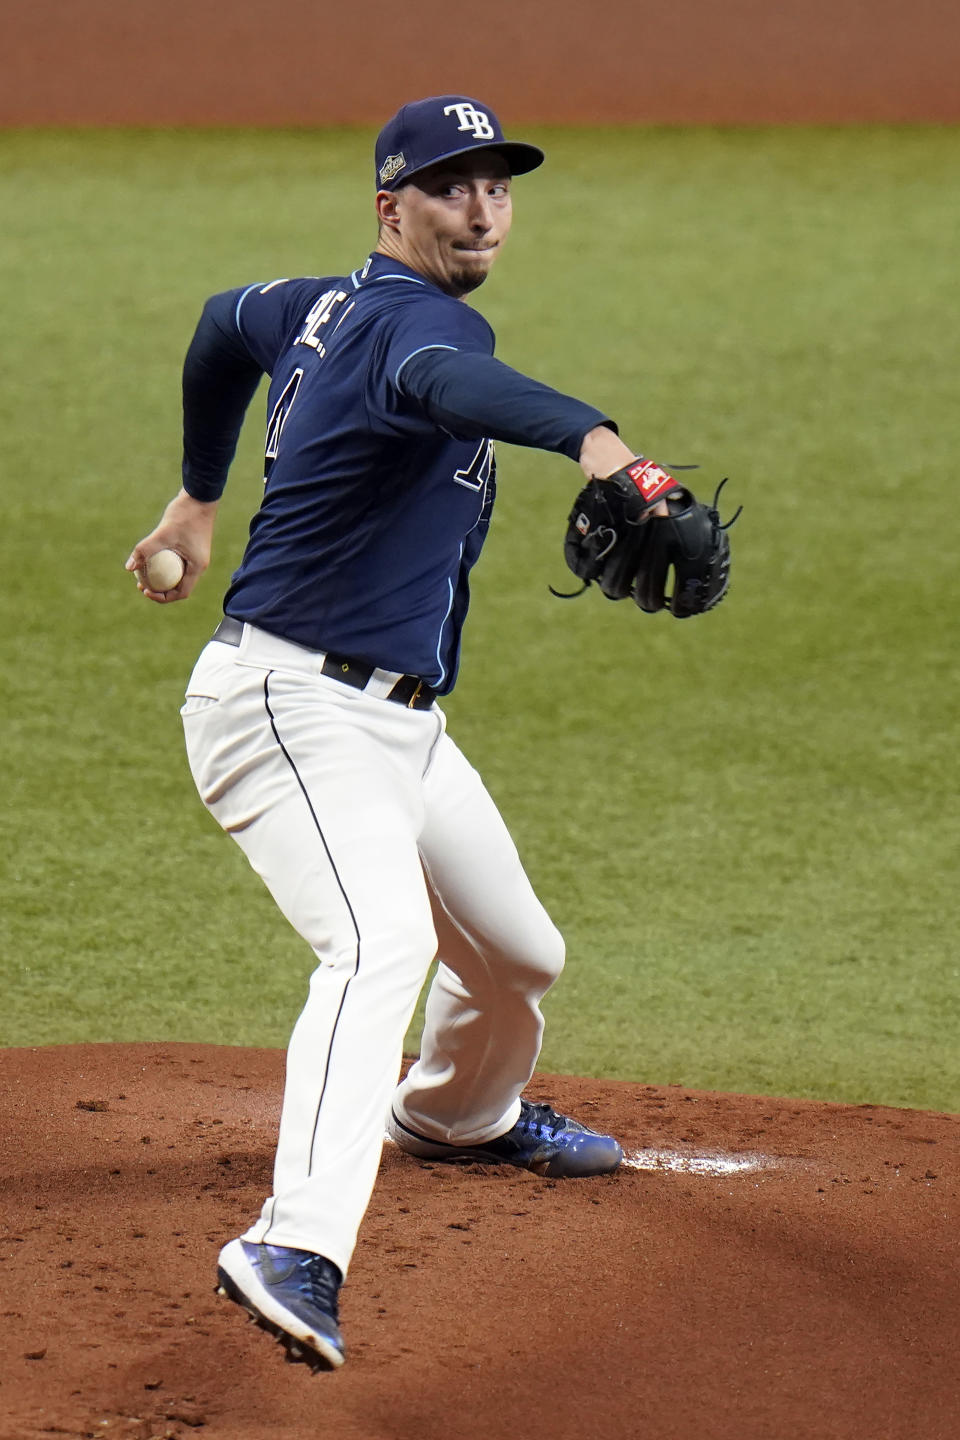 Tampa Bay Rays starting pitcher Blake Snell goes into his windup against the Toronto Blue Jays during the first inning of Game 1 of a wild card playoff series baseball game Tuesday, Sept. 29, 2020, in St. Petersburg, Fla. (AP Photo/Chris O'Meara)